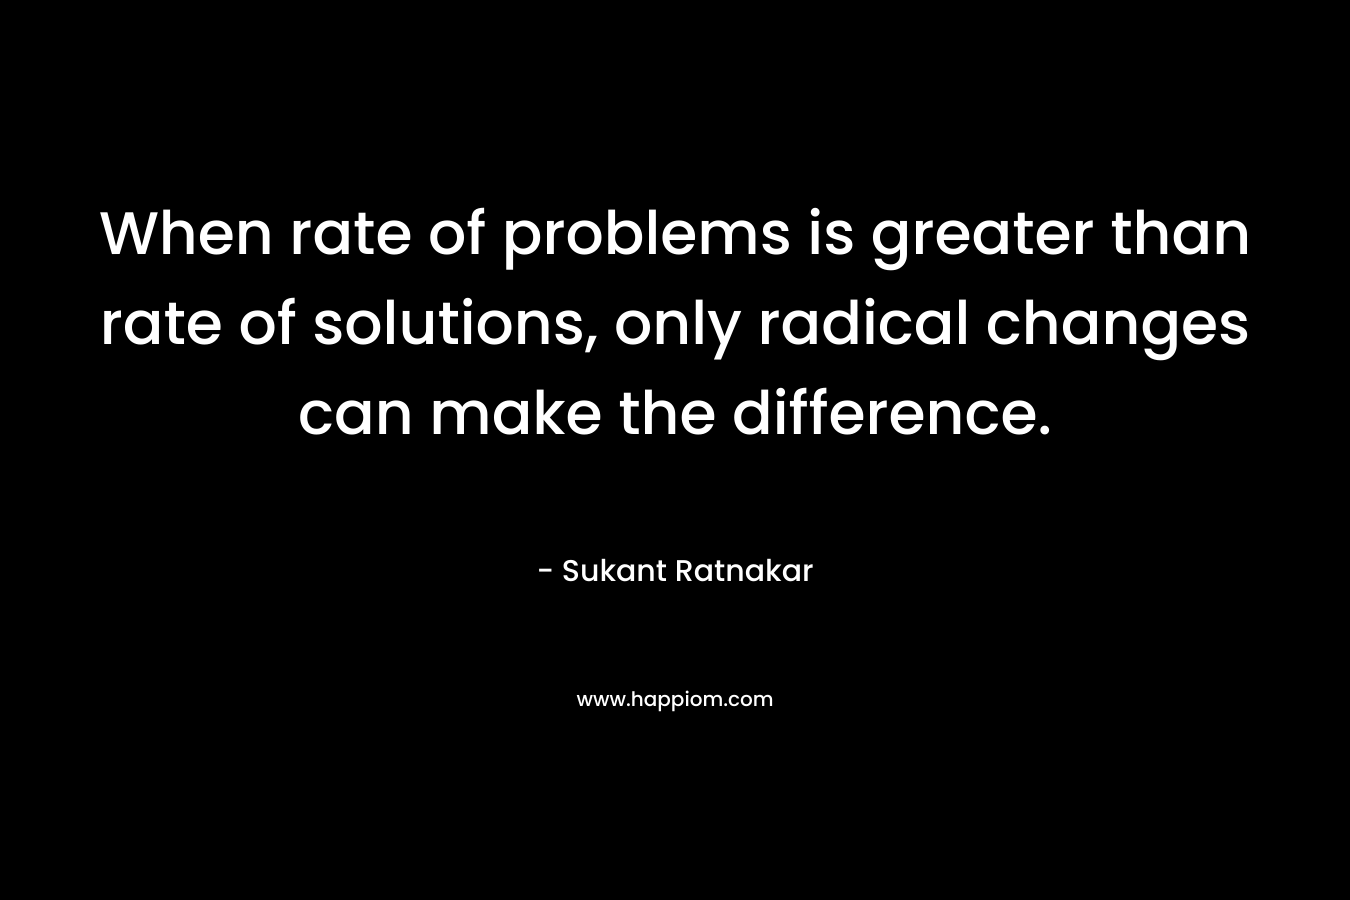 When rate of problems is greater than rate of solutions, only radical changes can make the difference.